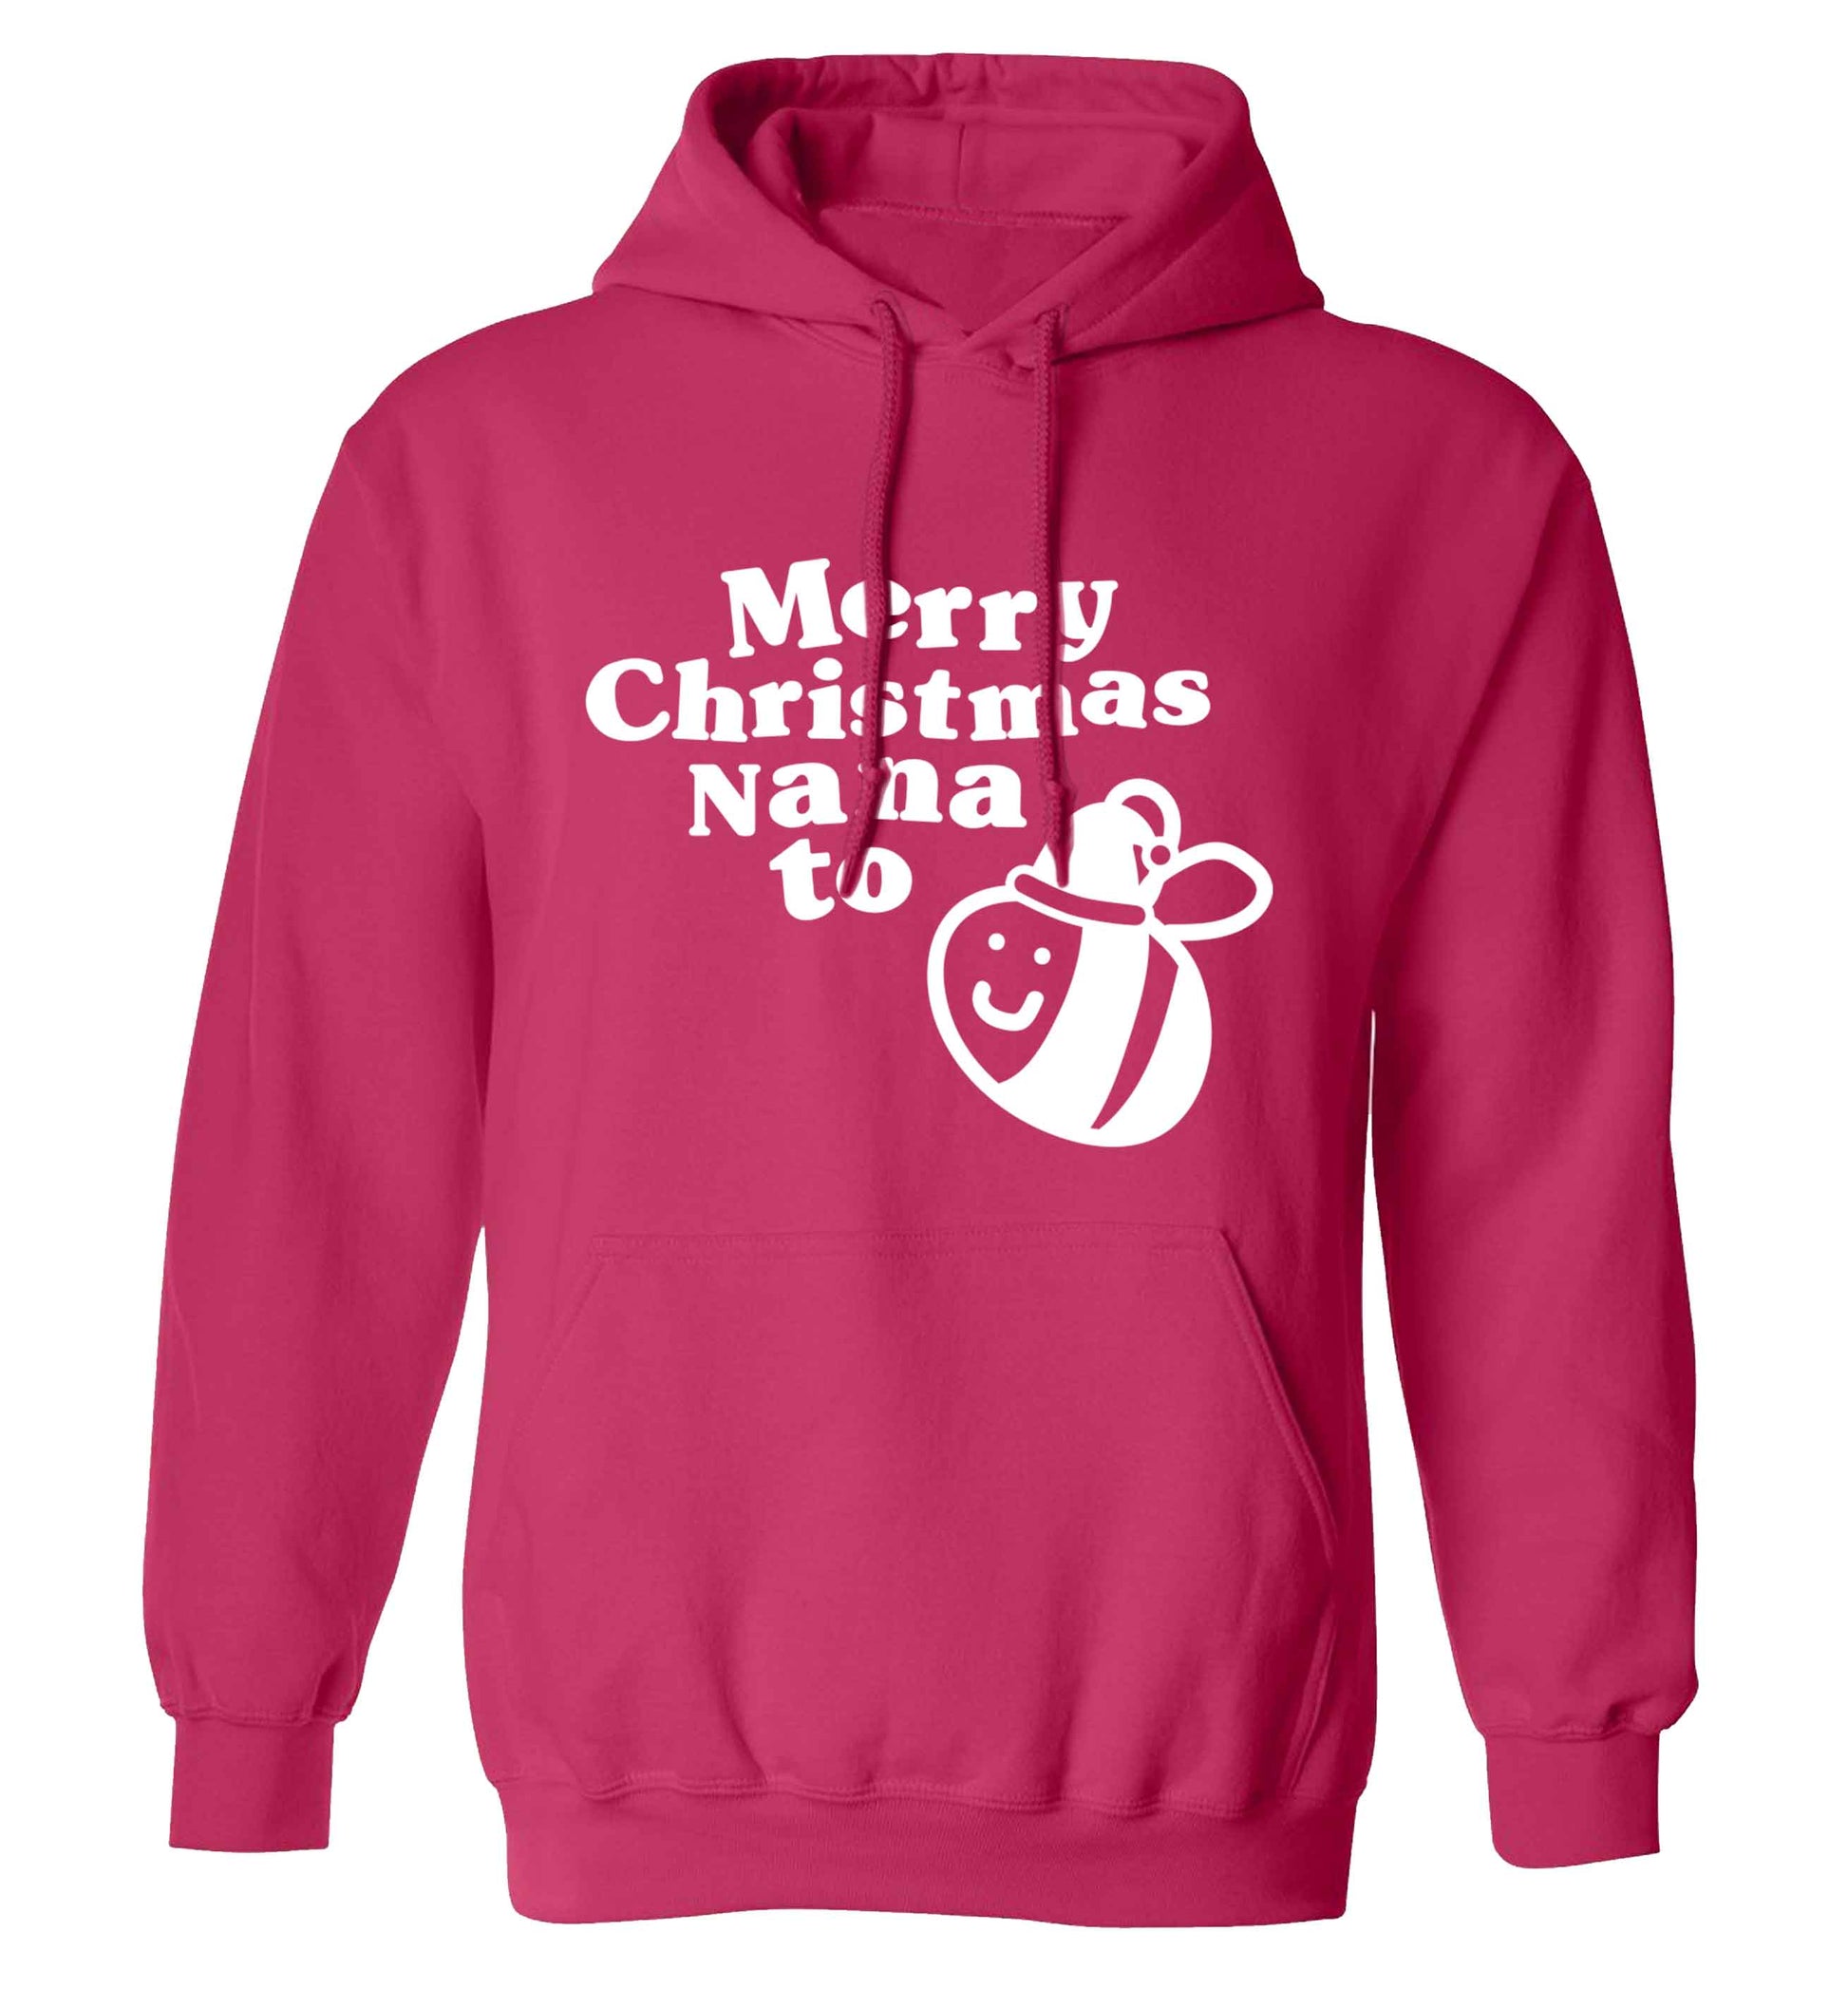 Merry Christmas nana to be adults unisex pink hoodie 2XL